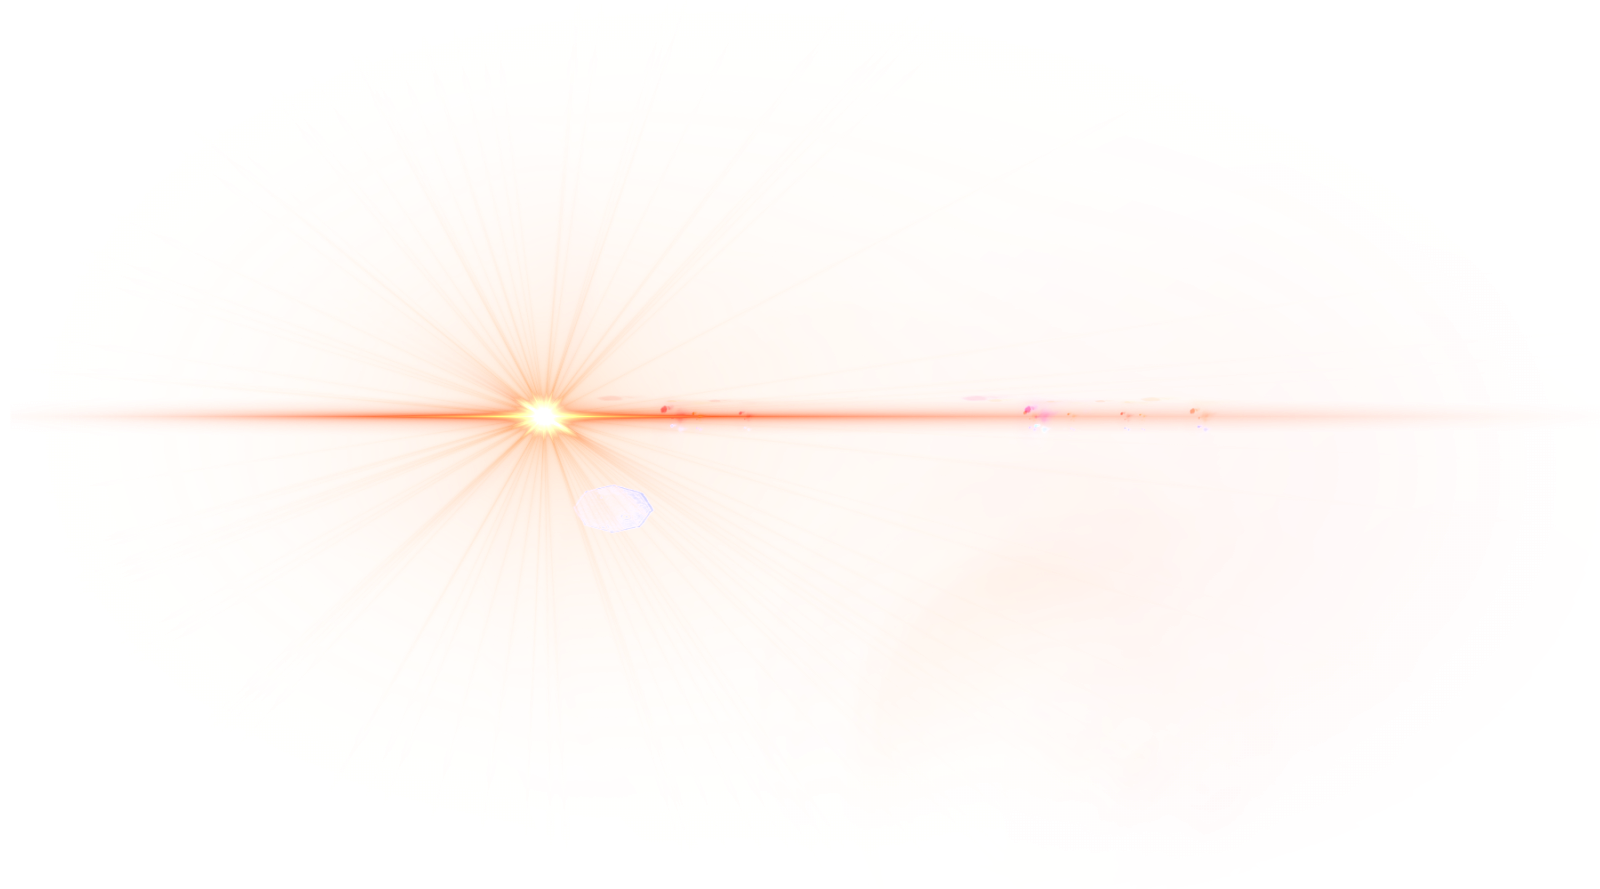 All New Lens Flare Png PnG Effects | Royal Editing World